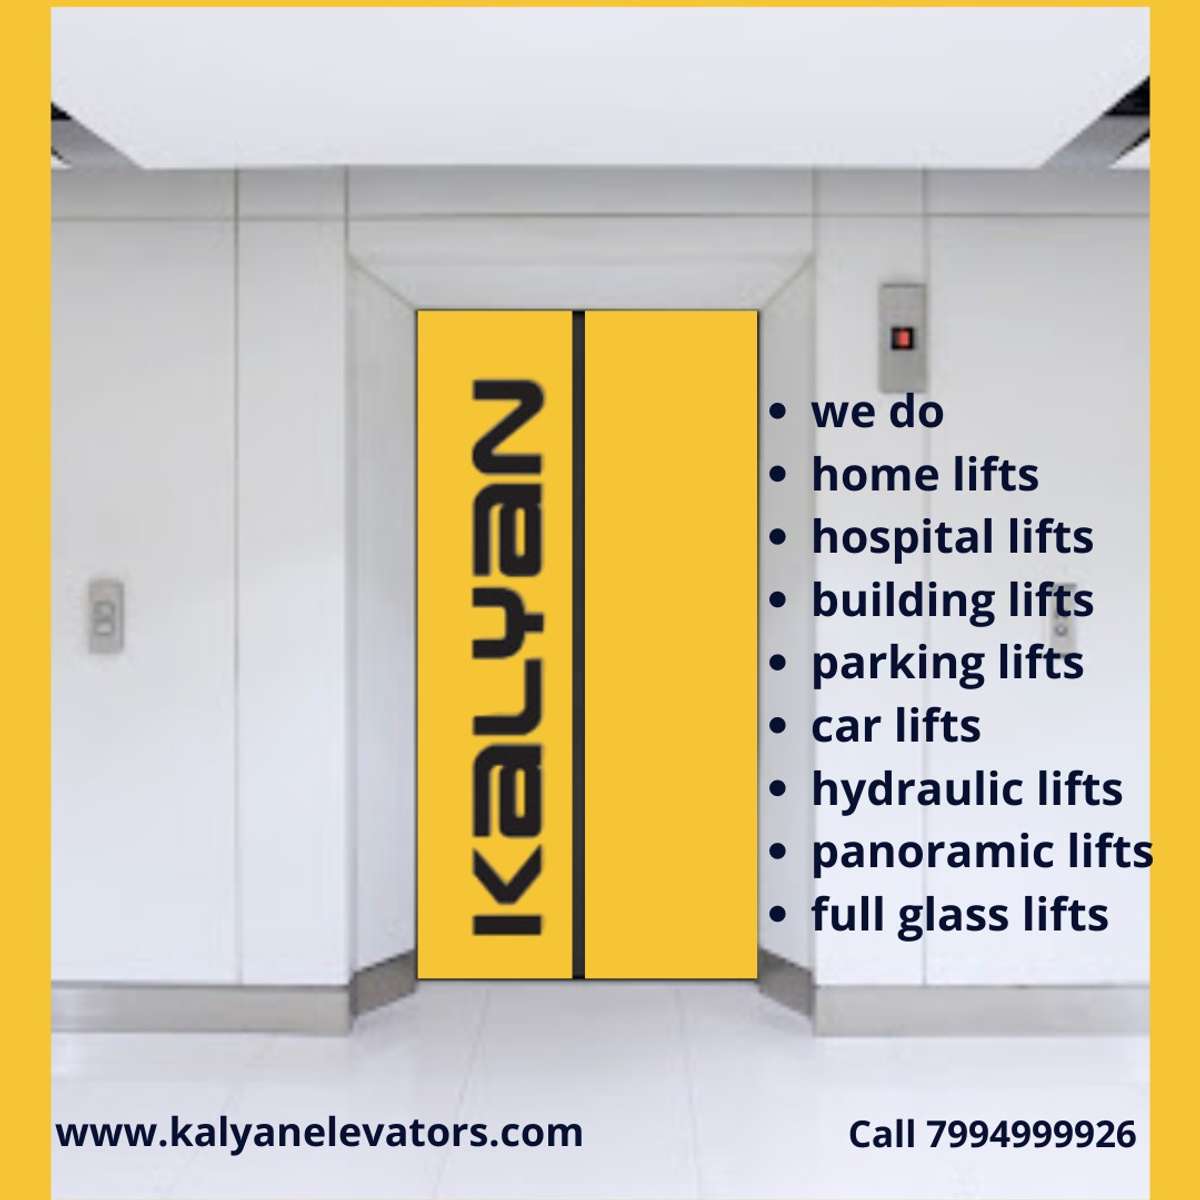 Kalyan Elevators offers the long-awaited solution to vertical mobility within homes at affordable prices and easy-to-use features. Our customized and aesthetically designed home lifts are easily installable in preexisting homes as well as houses under construction, and help you relieve the headache of climbing. More details:- 